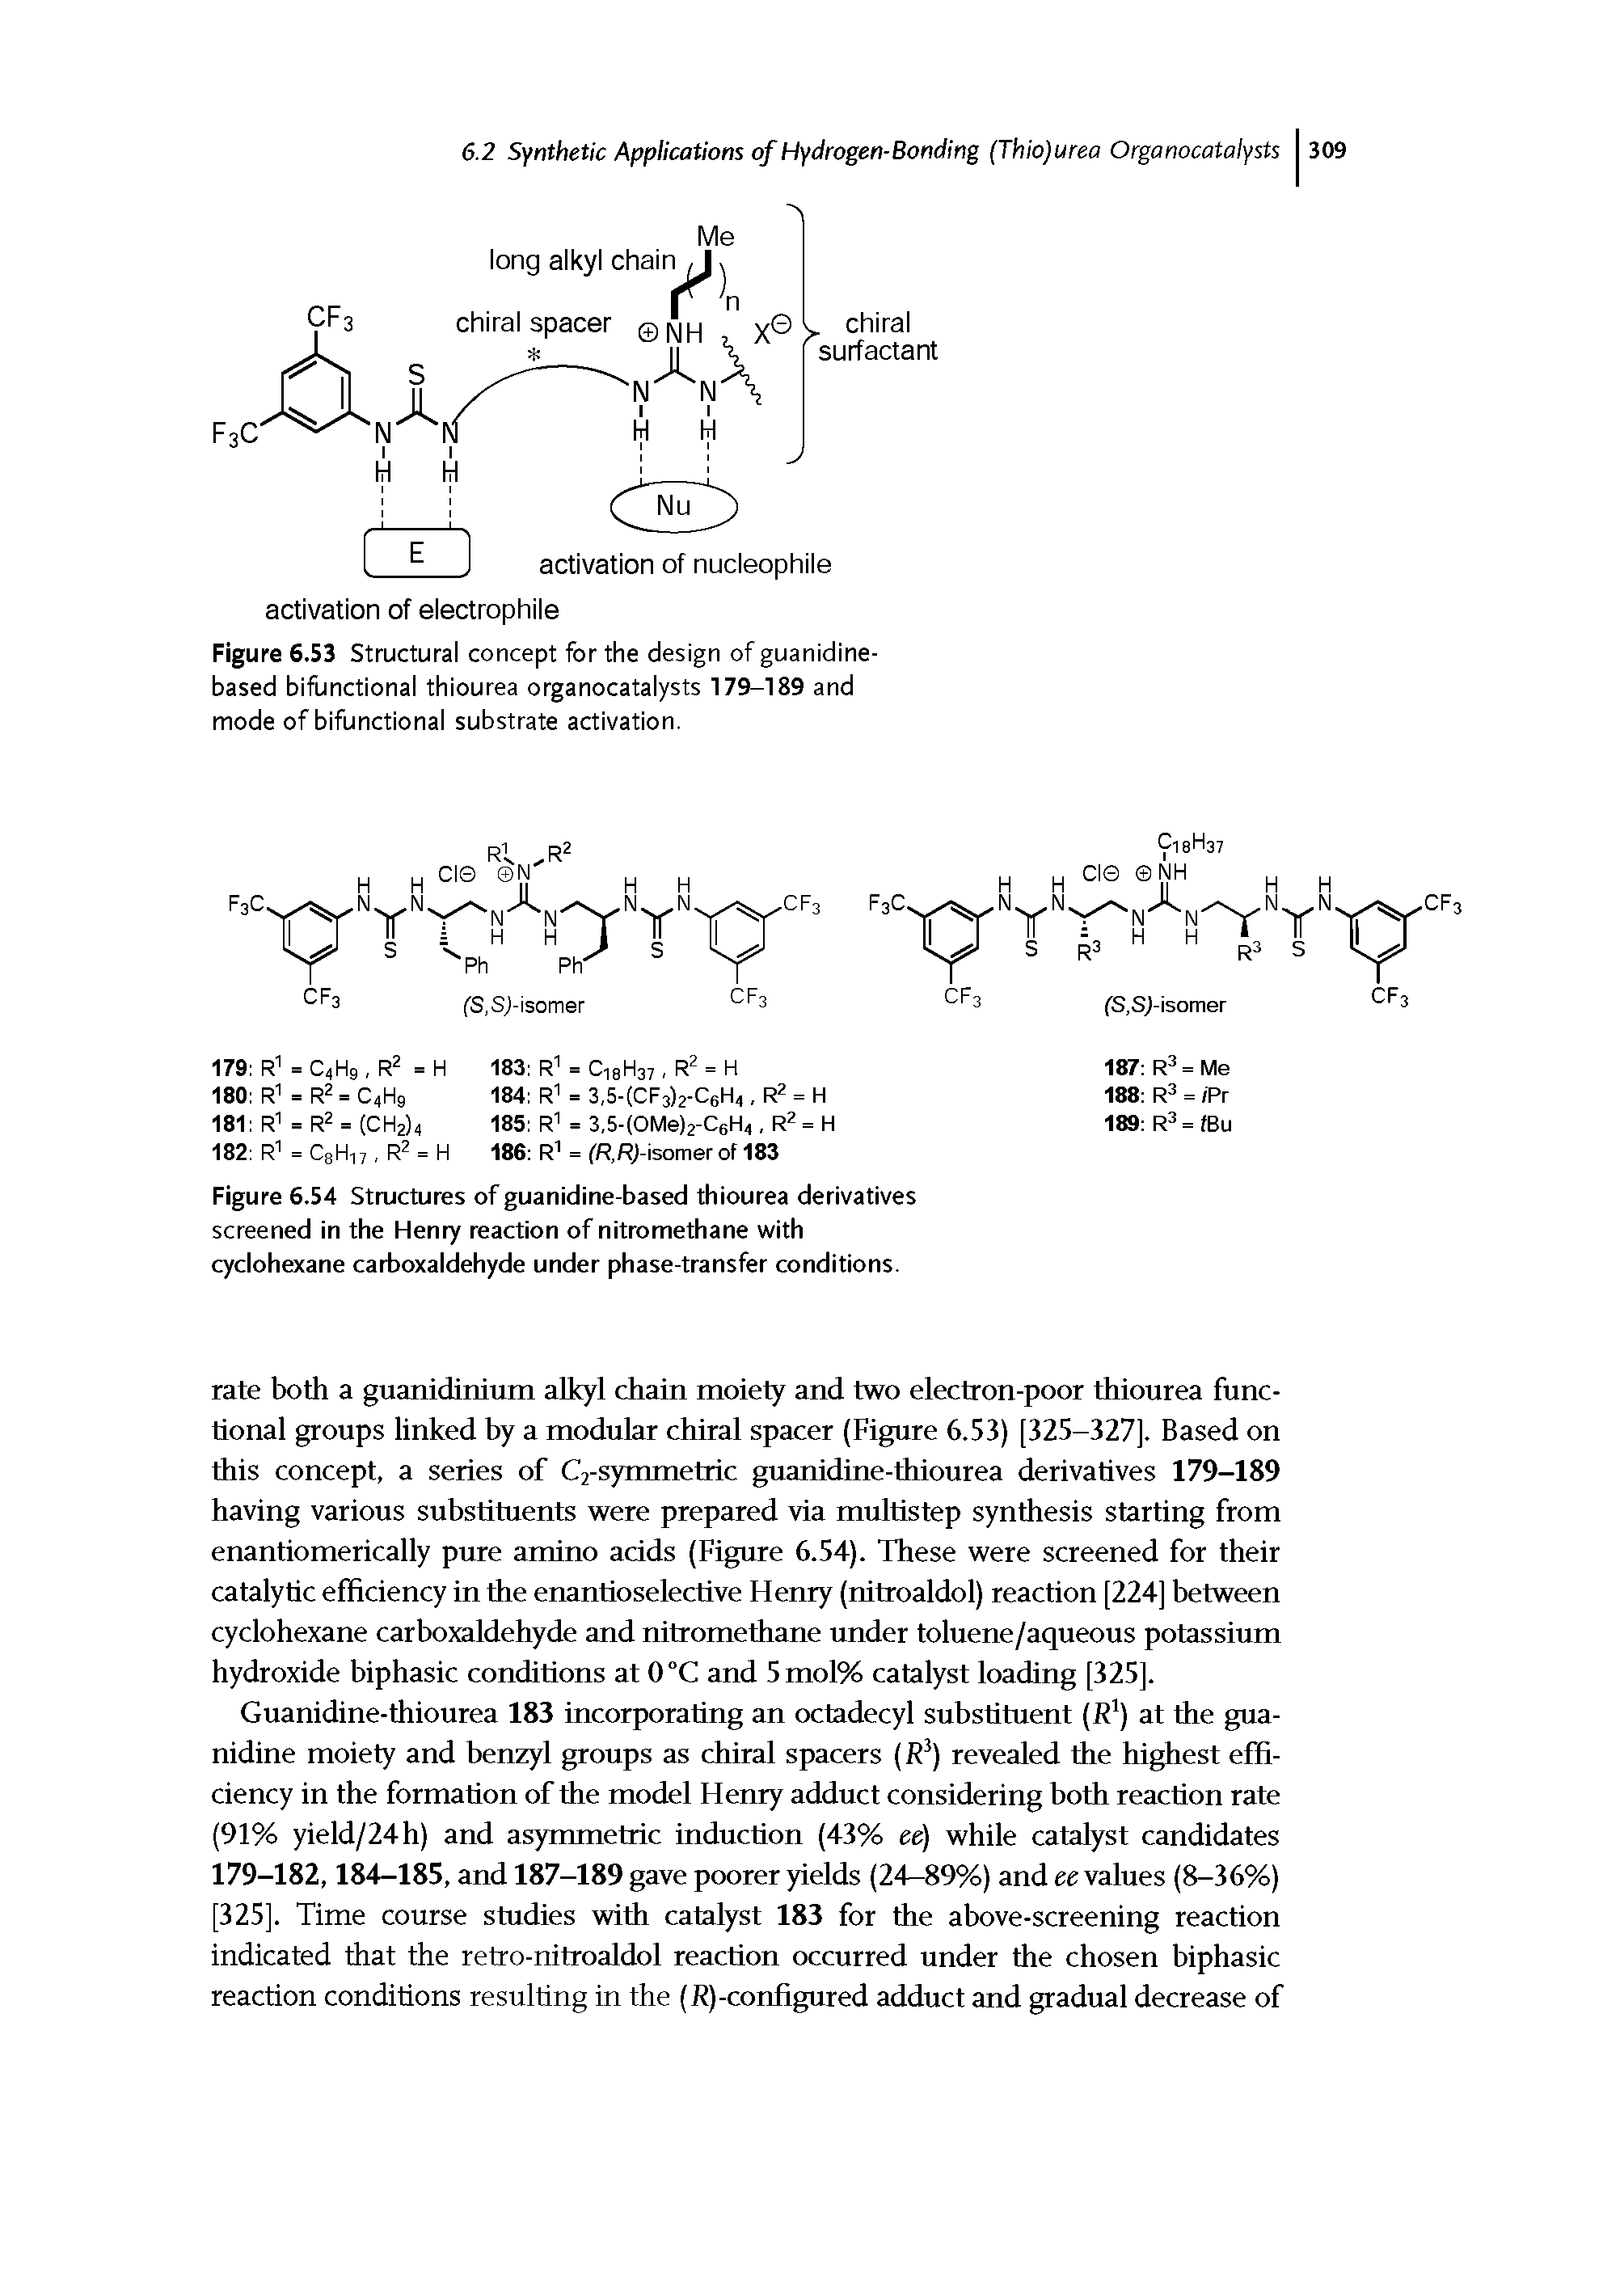 Figure 6.53 Structurai concept for the design of guanidine-based bifunctionai thiourea organocataiysts 179-189 and mode of bifunctionai substrate activation.